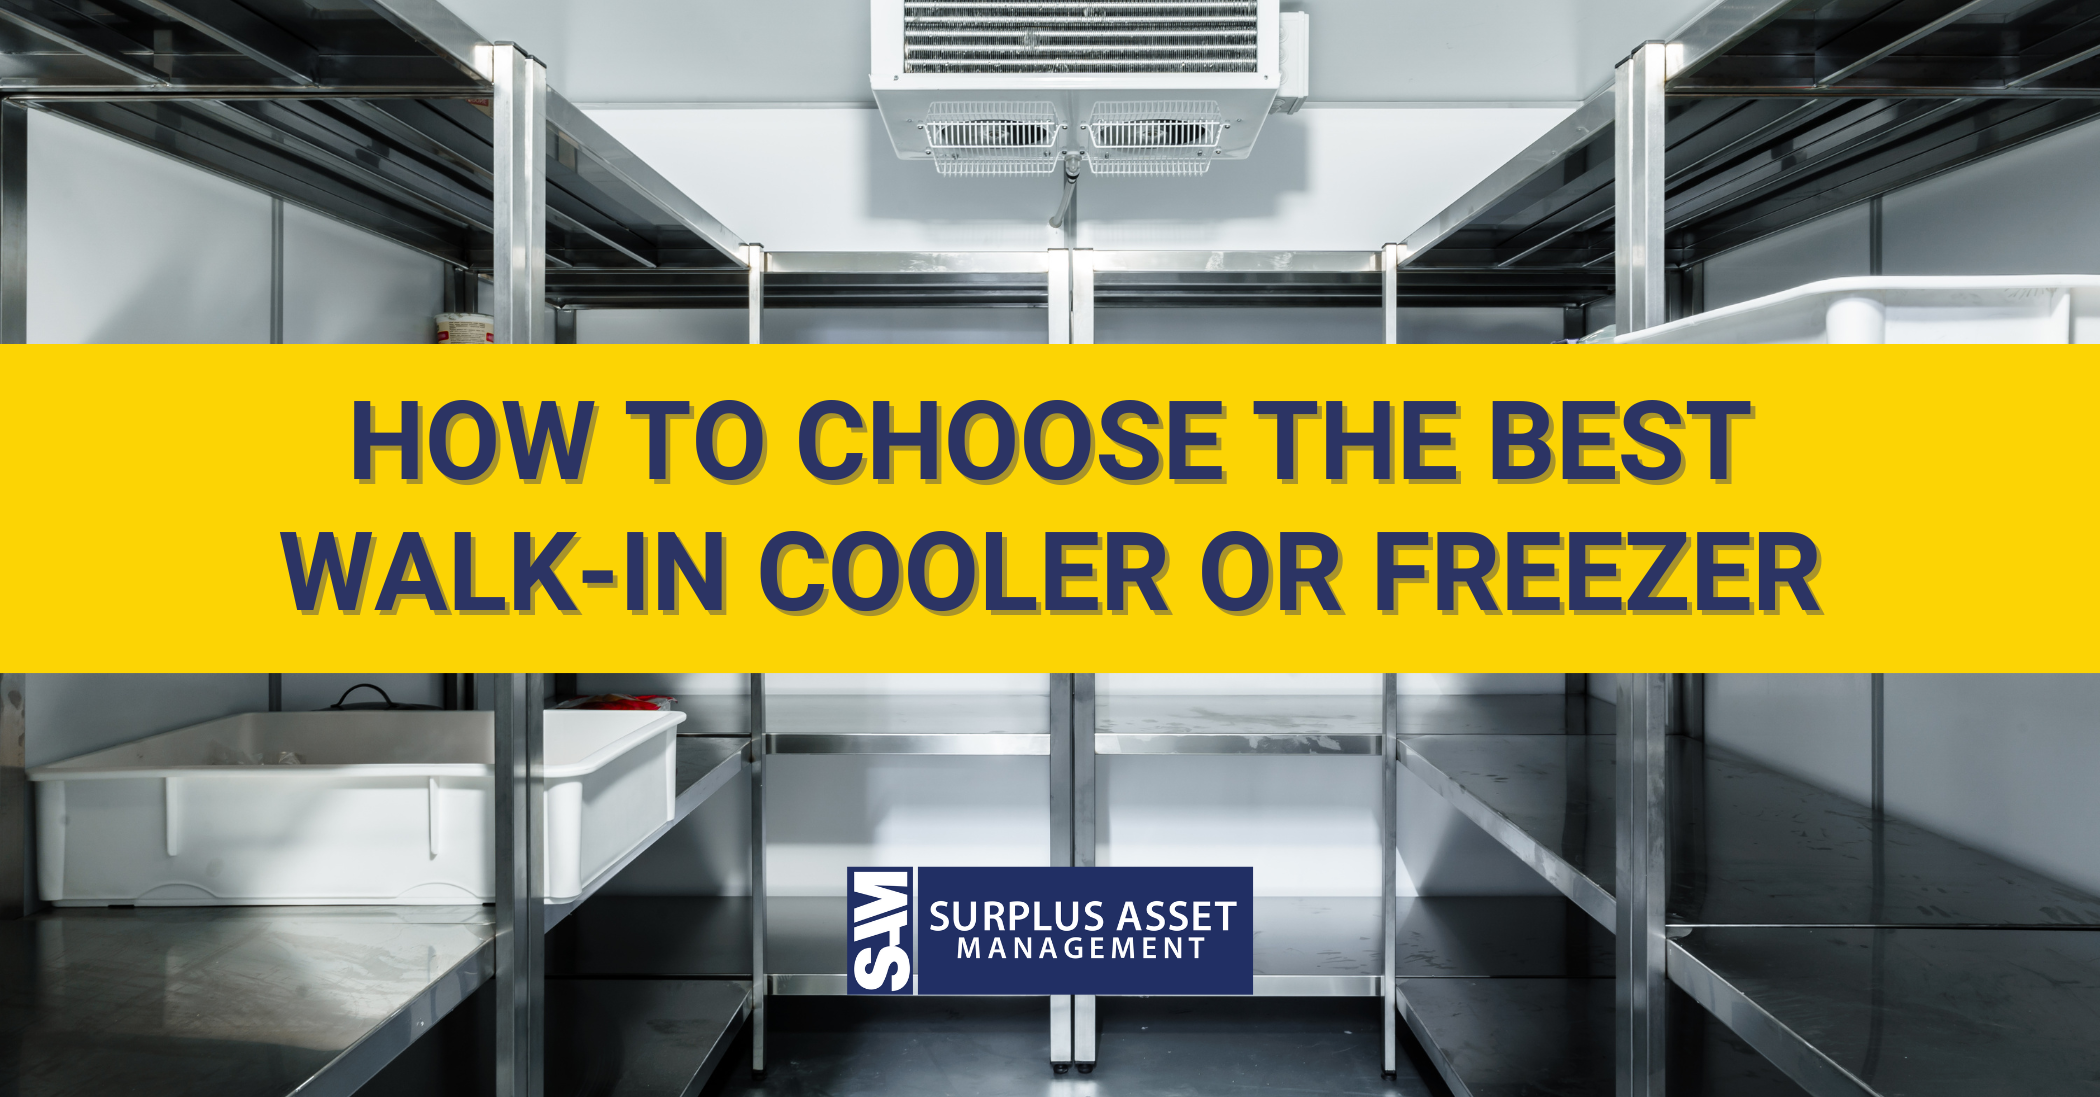 How to Choose the Best Walk-In Cooler or Freezer